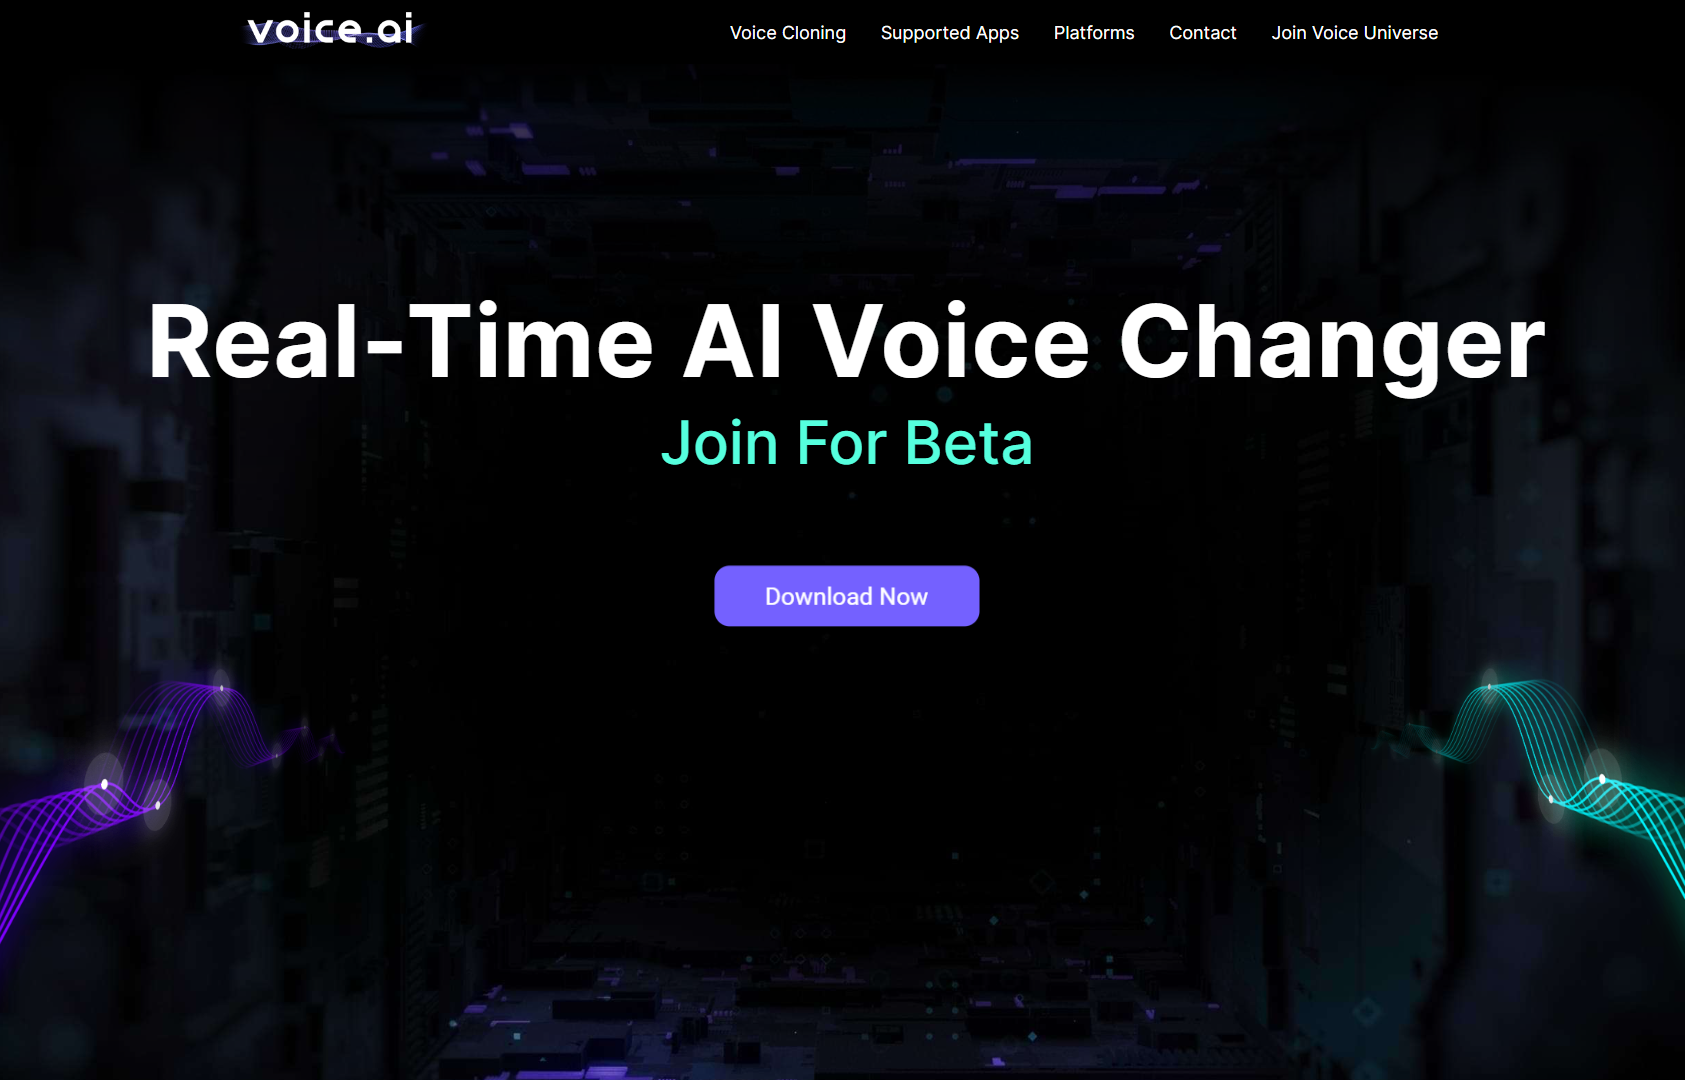 Voice.ai - Change your voice to famous celebrities in real time